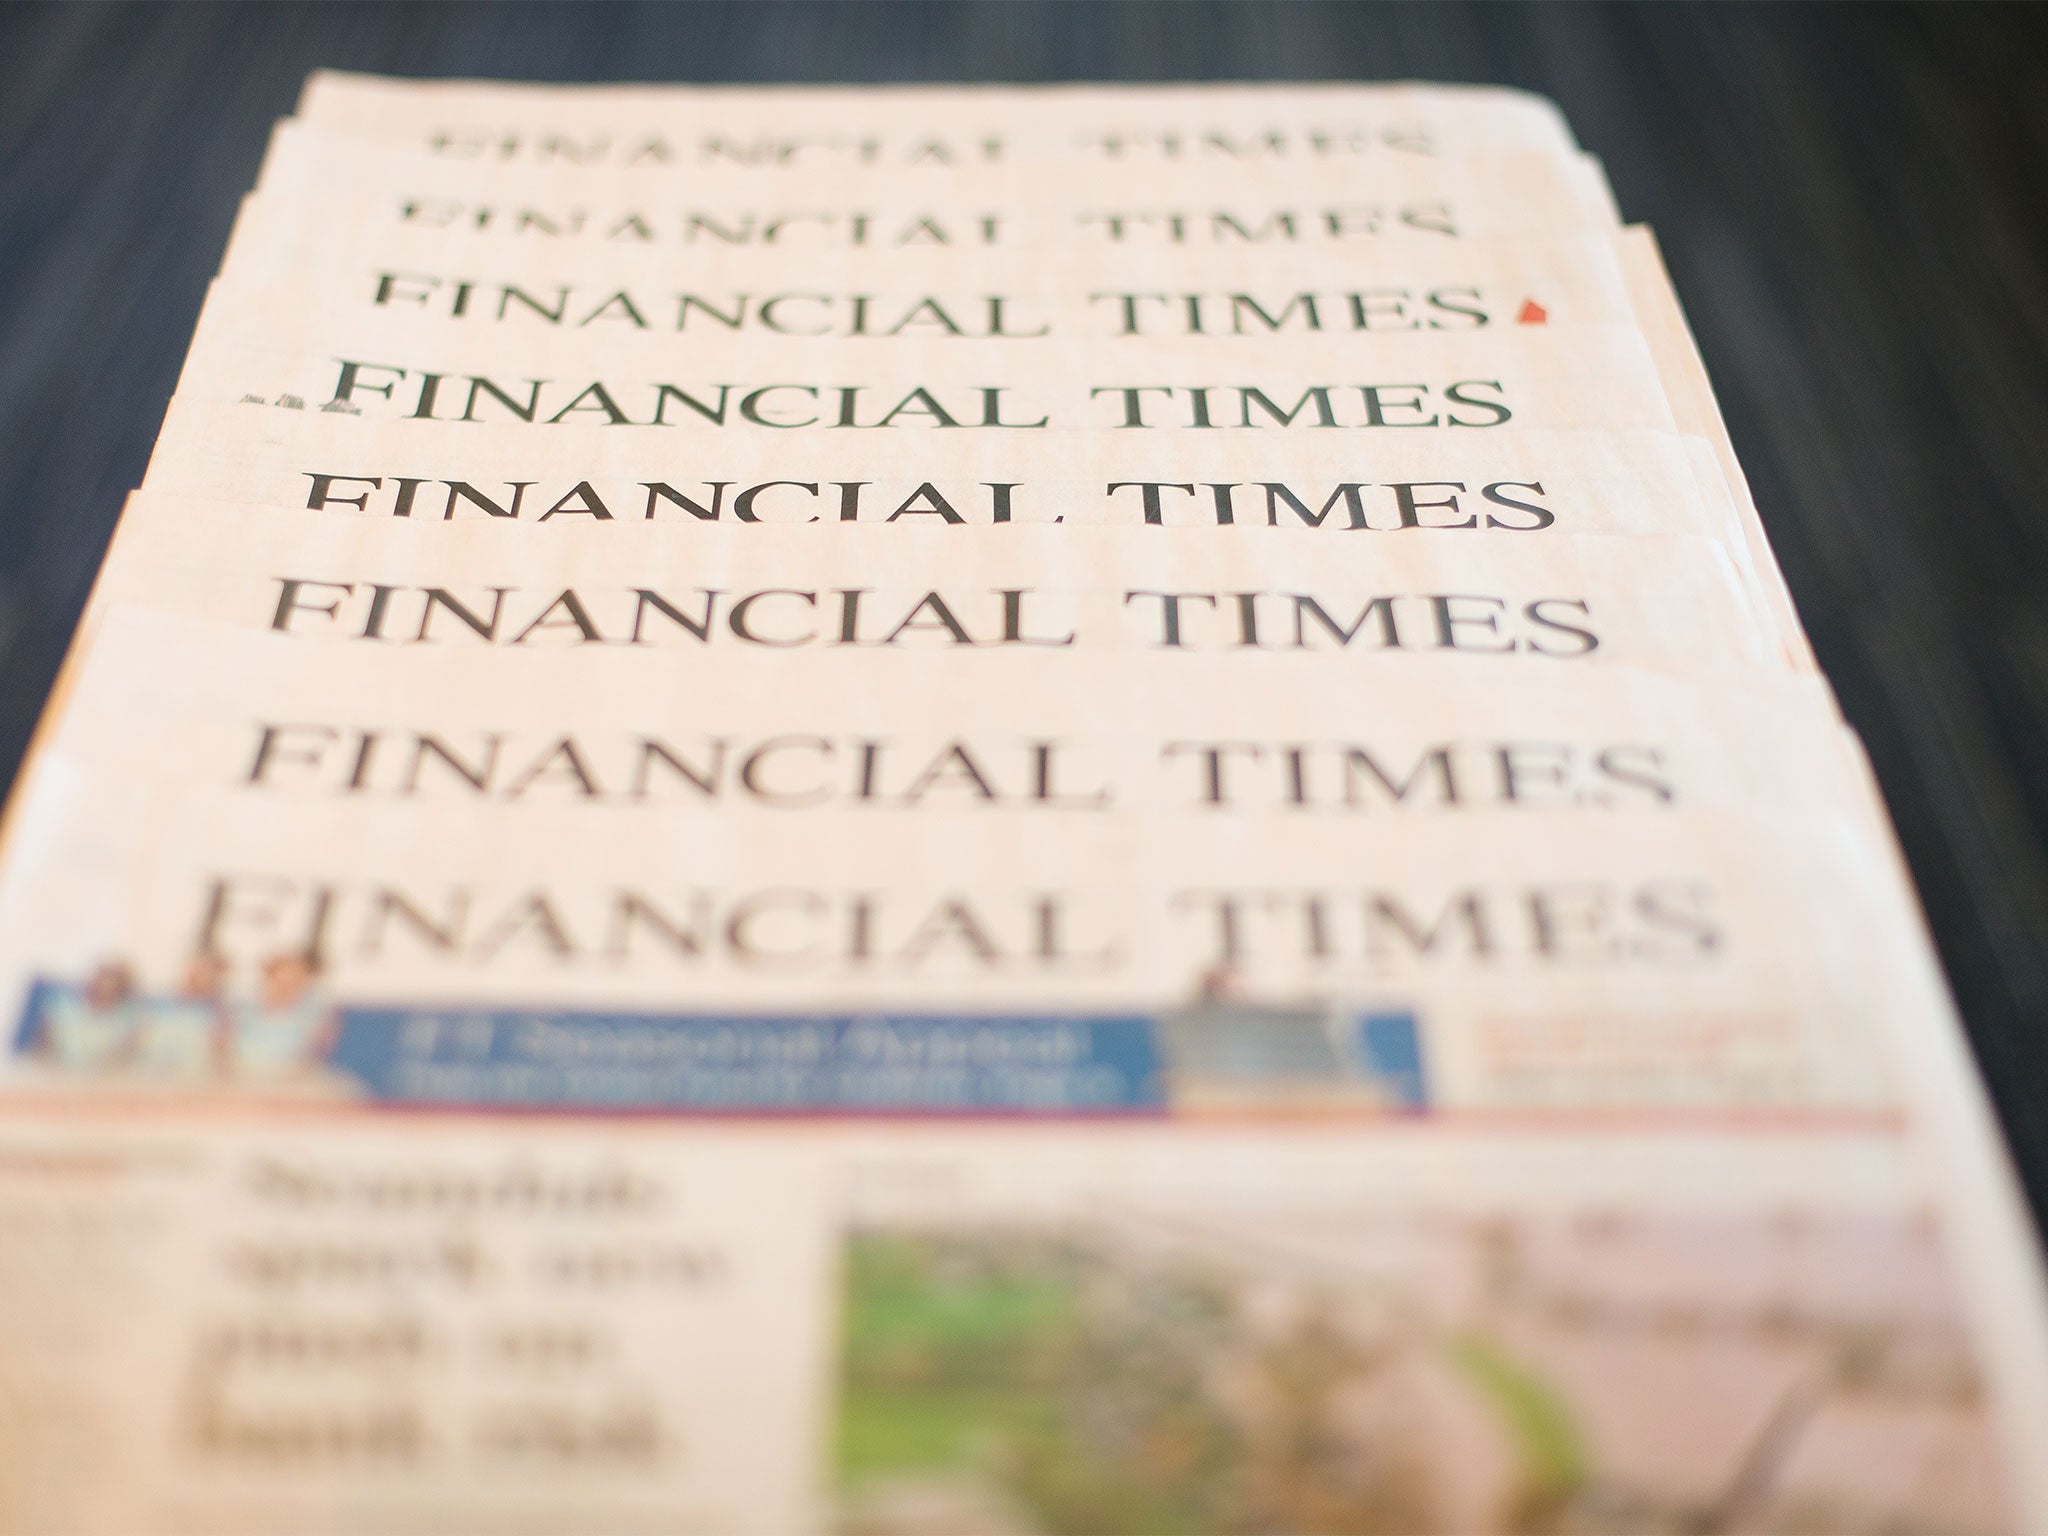 Publishing group Pearson has announced it is to sell the Financial Times Group to Japanese media firm Nikkei for £844m in cash.